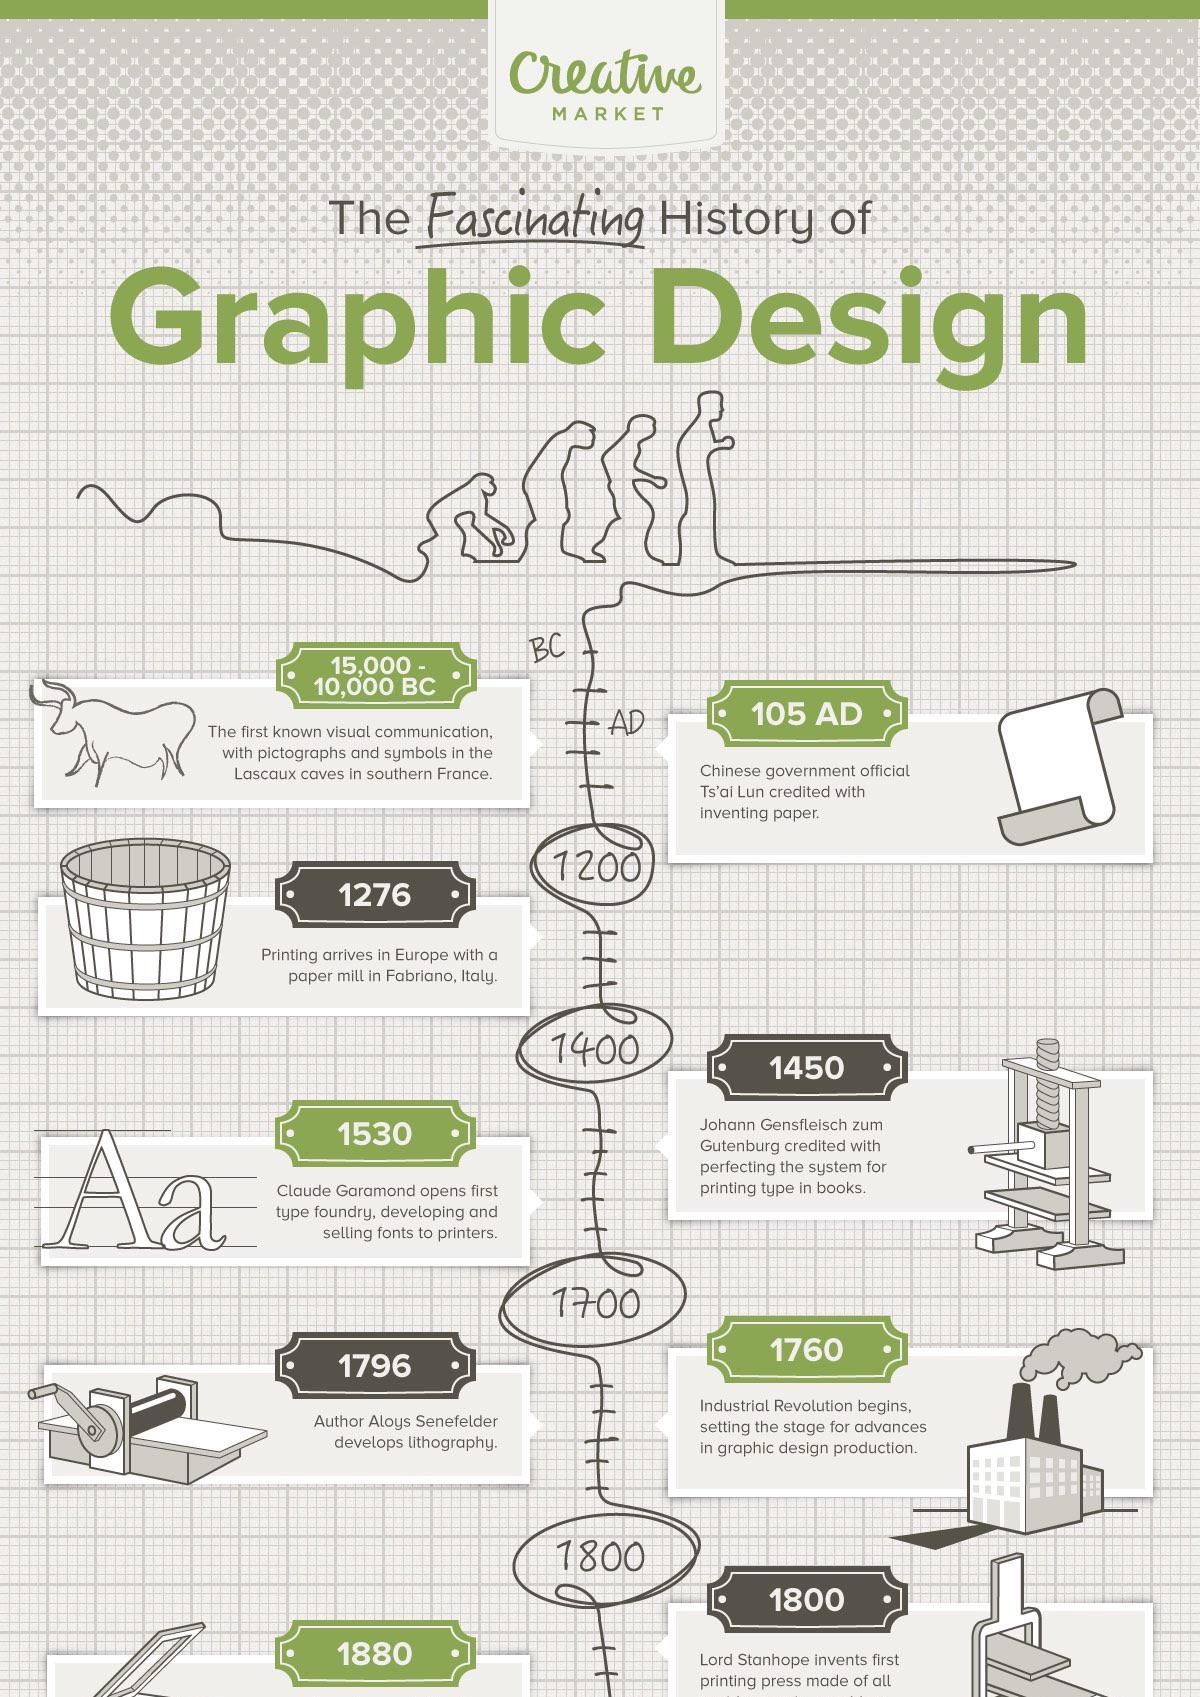 History of Fonts: A Typeface Timeline (with Infographic)